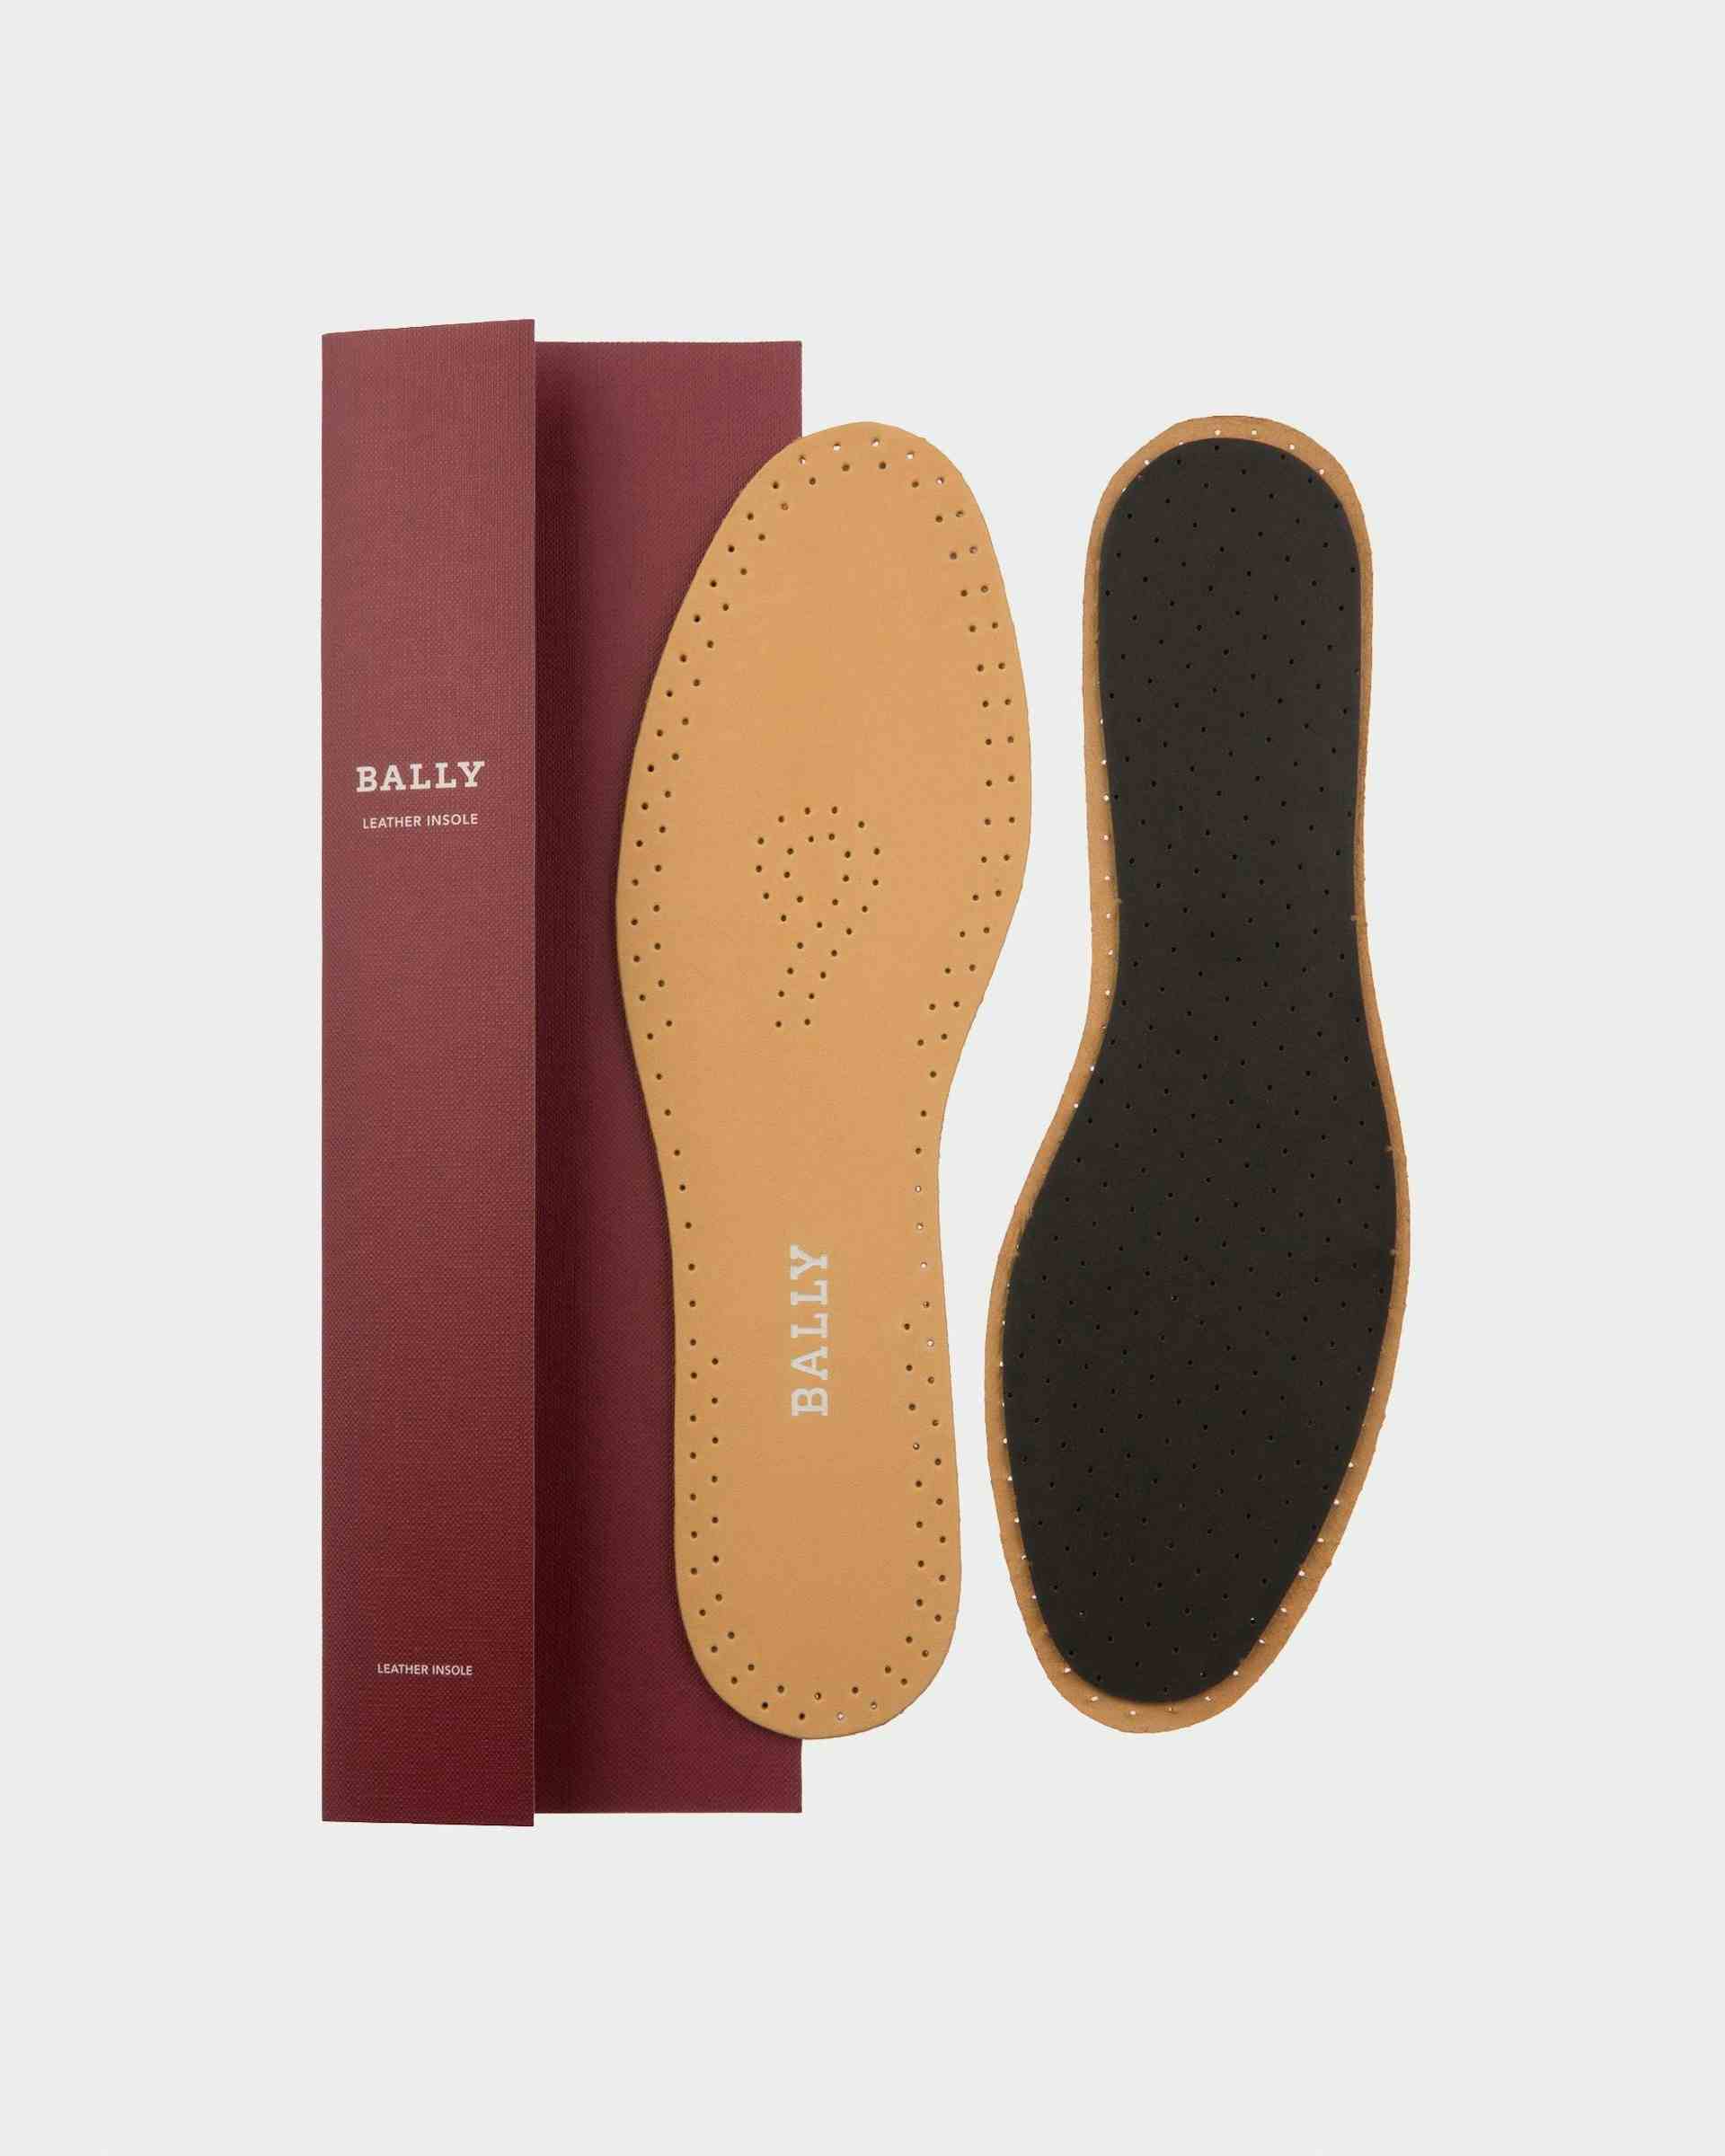 Leather Insole Shoe Care Accessory For All Shoes - Men's - Bally